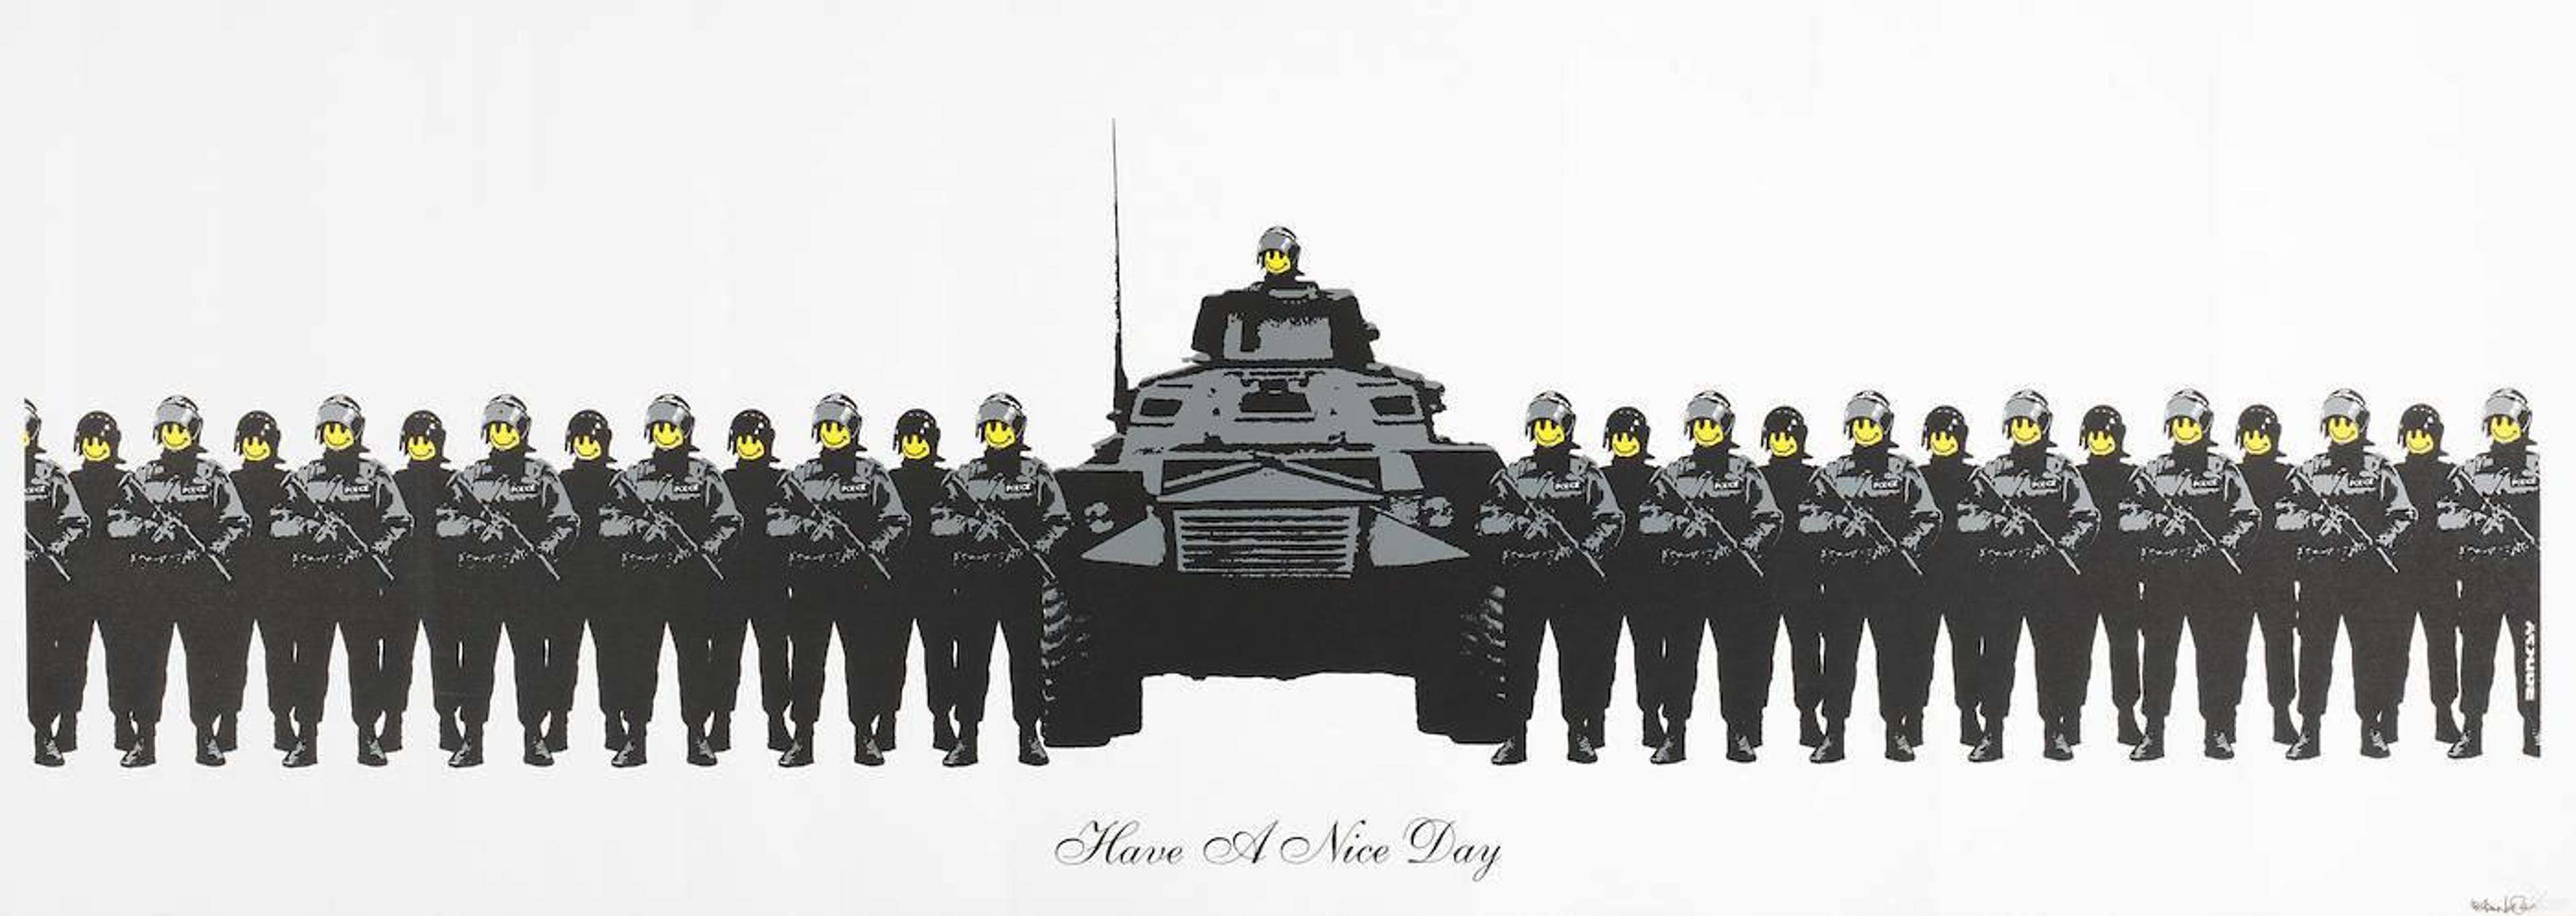 Have A Nice Day - Signed Print